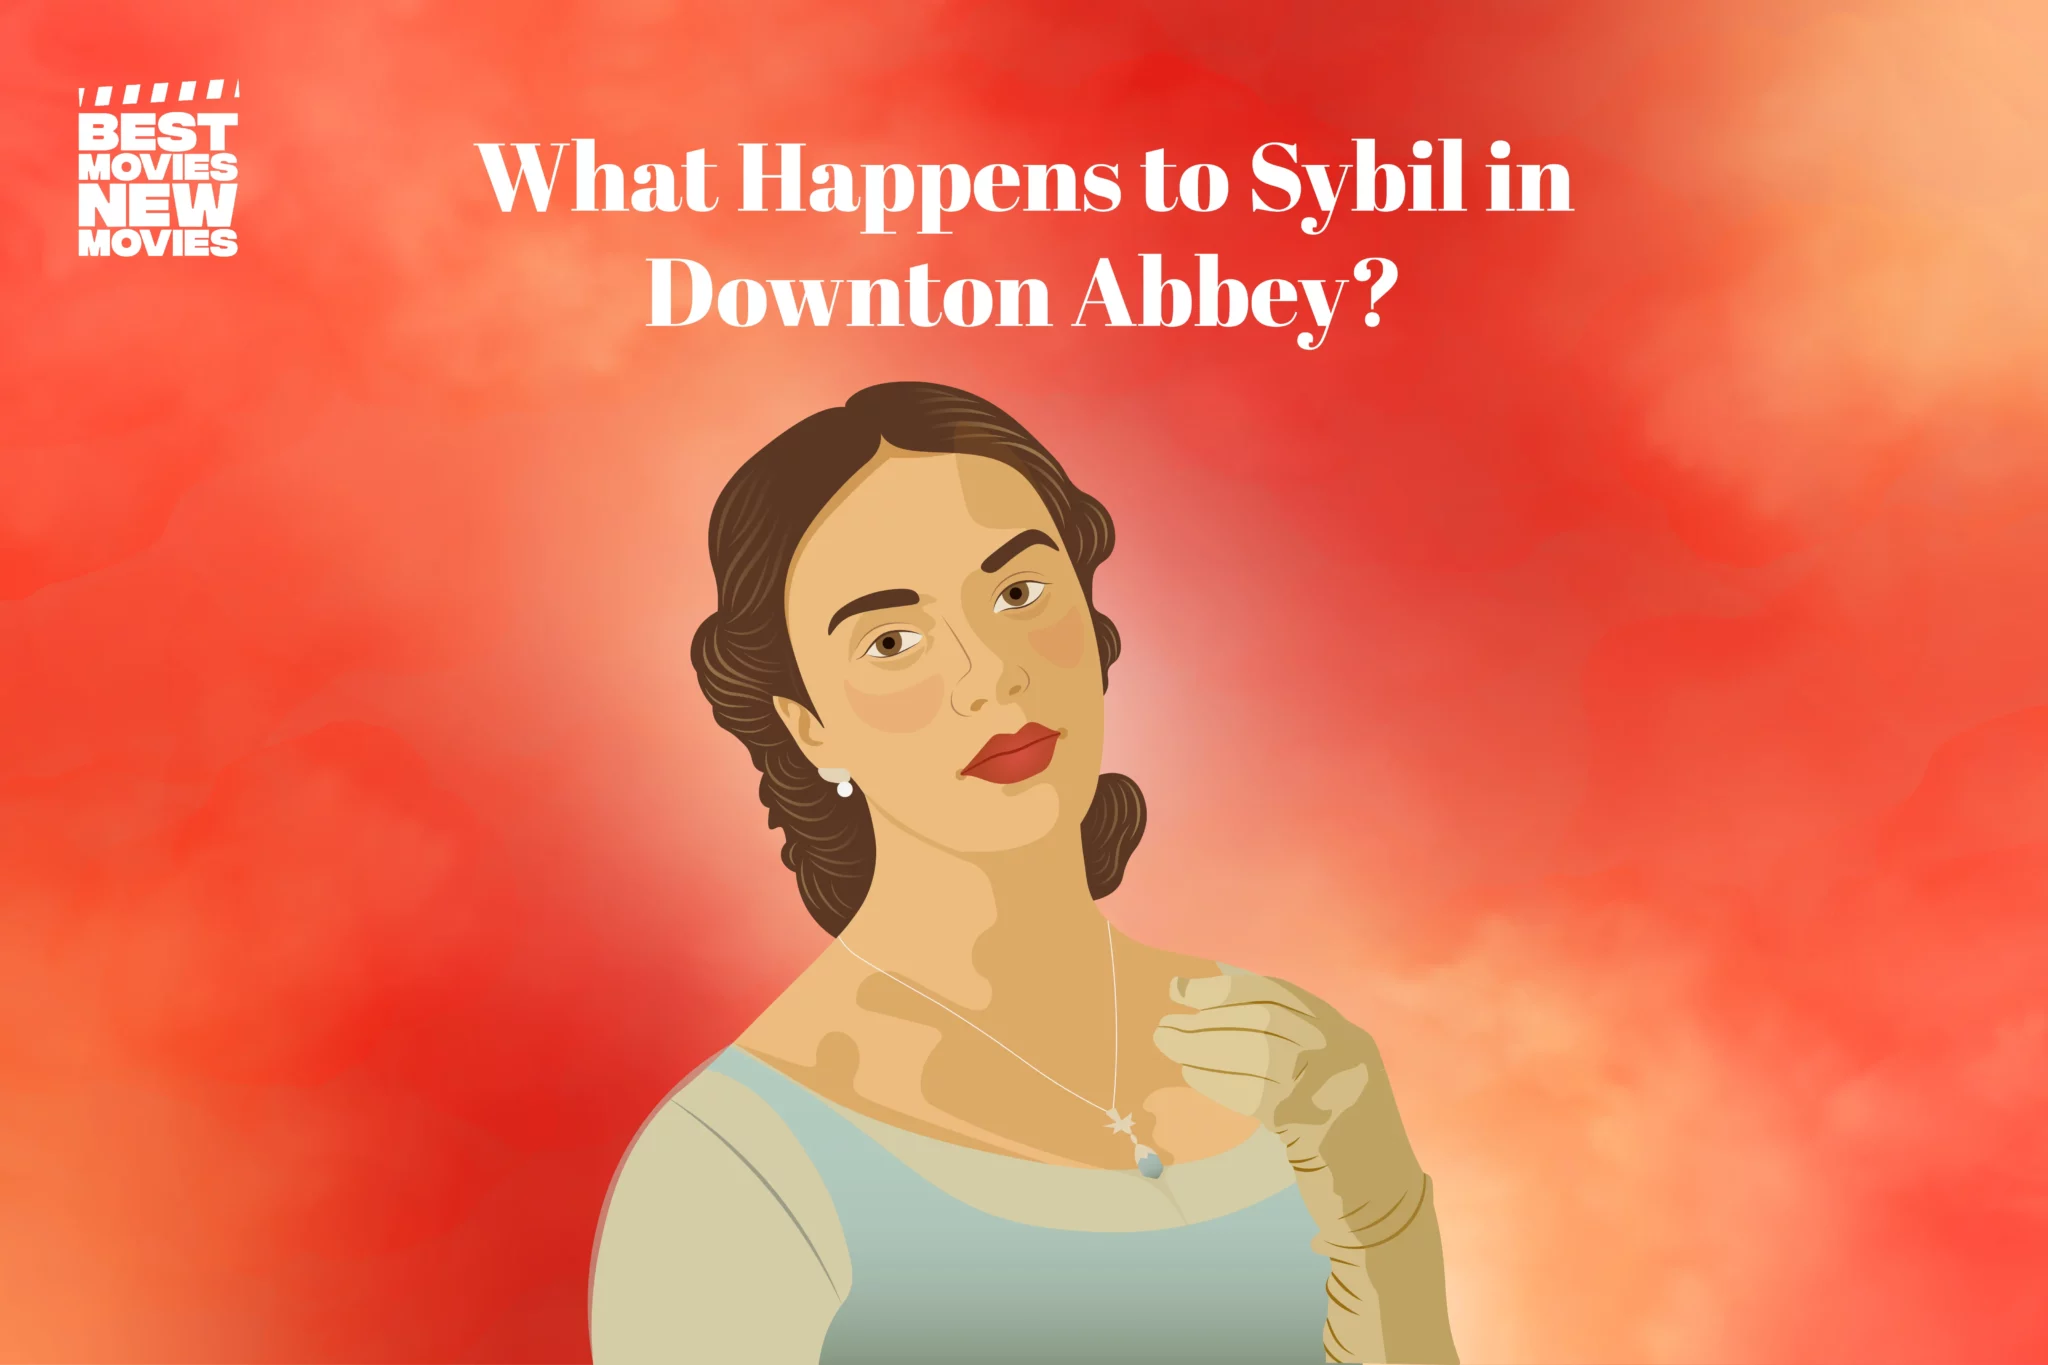 What Happens to Sybil in Downton Abbey